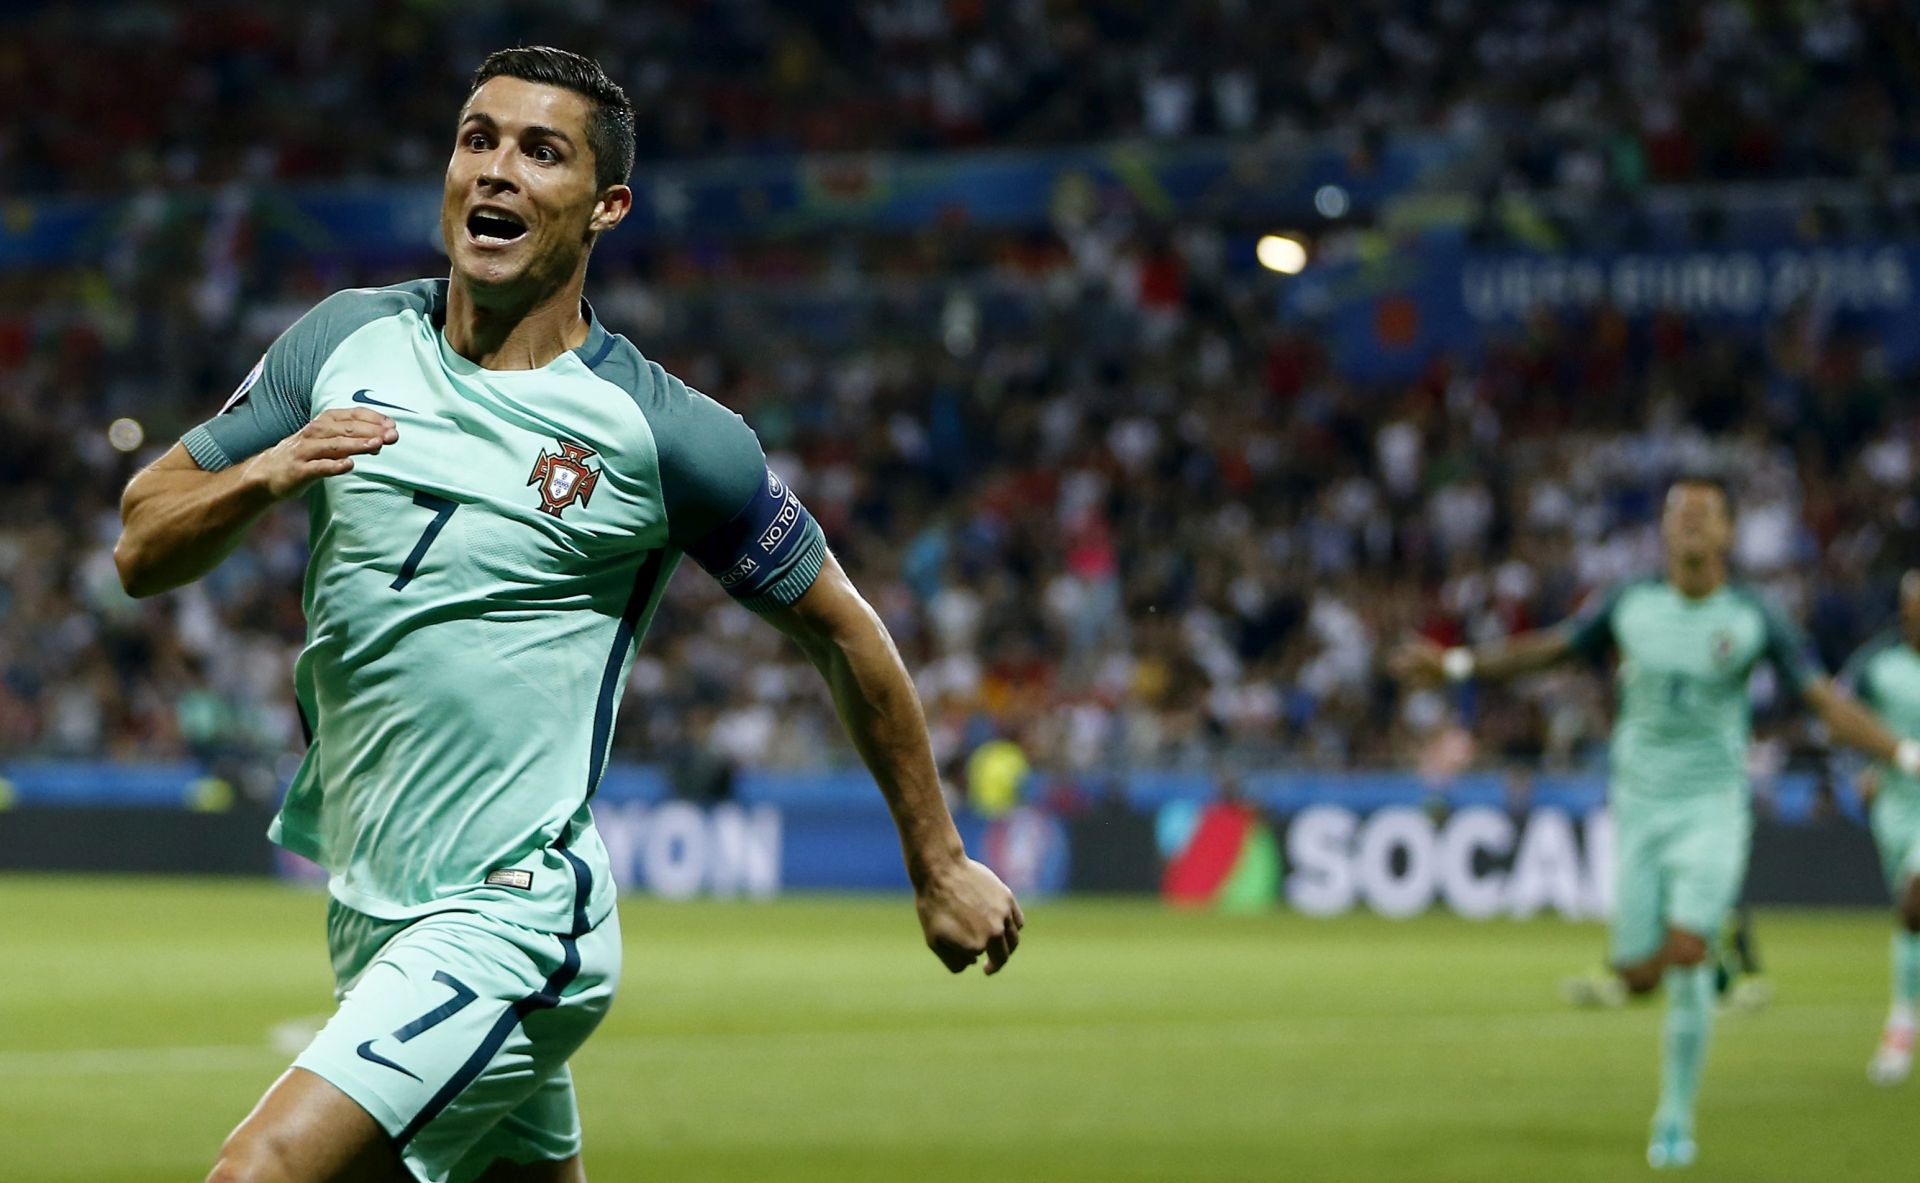 epa05411675 Cristiano Ronaldo of Portugal celebrates scoring the opening goal during the UEFA EURO 2016 semi final match between Portugal and Wales at Stade de Lyon in Lyon, France, 06 July 2016.

(RESTRICTIONS APPLY: For editorial news reporting purposes only. Not used for commercial or marketing purposes without prior written approval of UEFA. Images must appear as still images and must not emulate match action video footage. Photographs published in online publications (whether via the Internet or otherwise) shall have an interval of at least 20 seconds between the posting.)  EPA/ABEDIN TAHERKENAREH   EDITORIAL USE ONLY